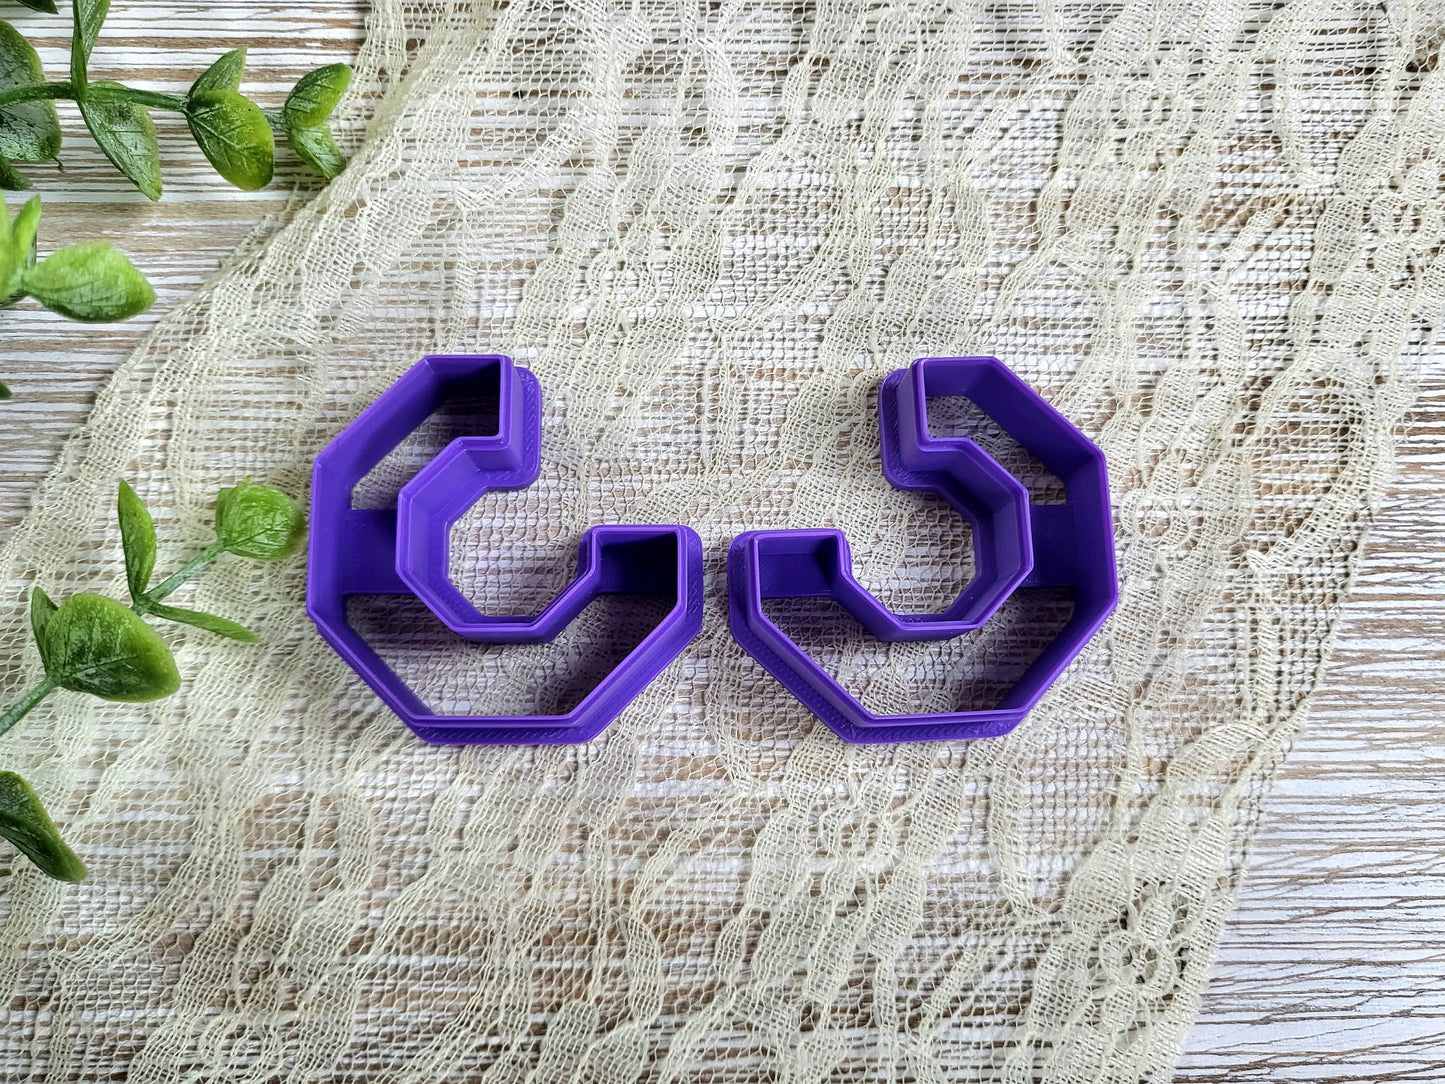 Octagon Hoop Clay Cutter, Polymer Clay Cutters, Earring Jewelry Making, Hoop Making Clay Cutter, Hoop Clay Cutter